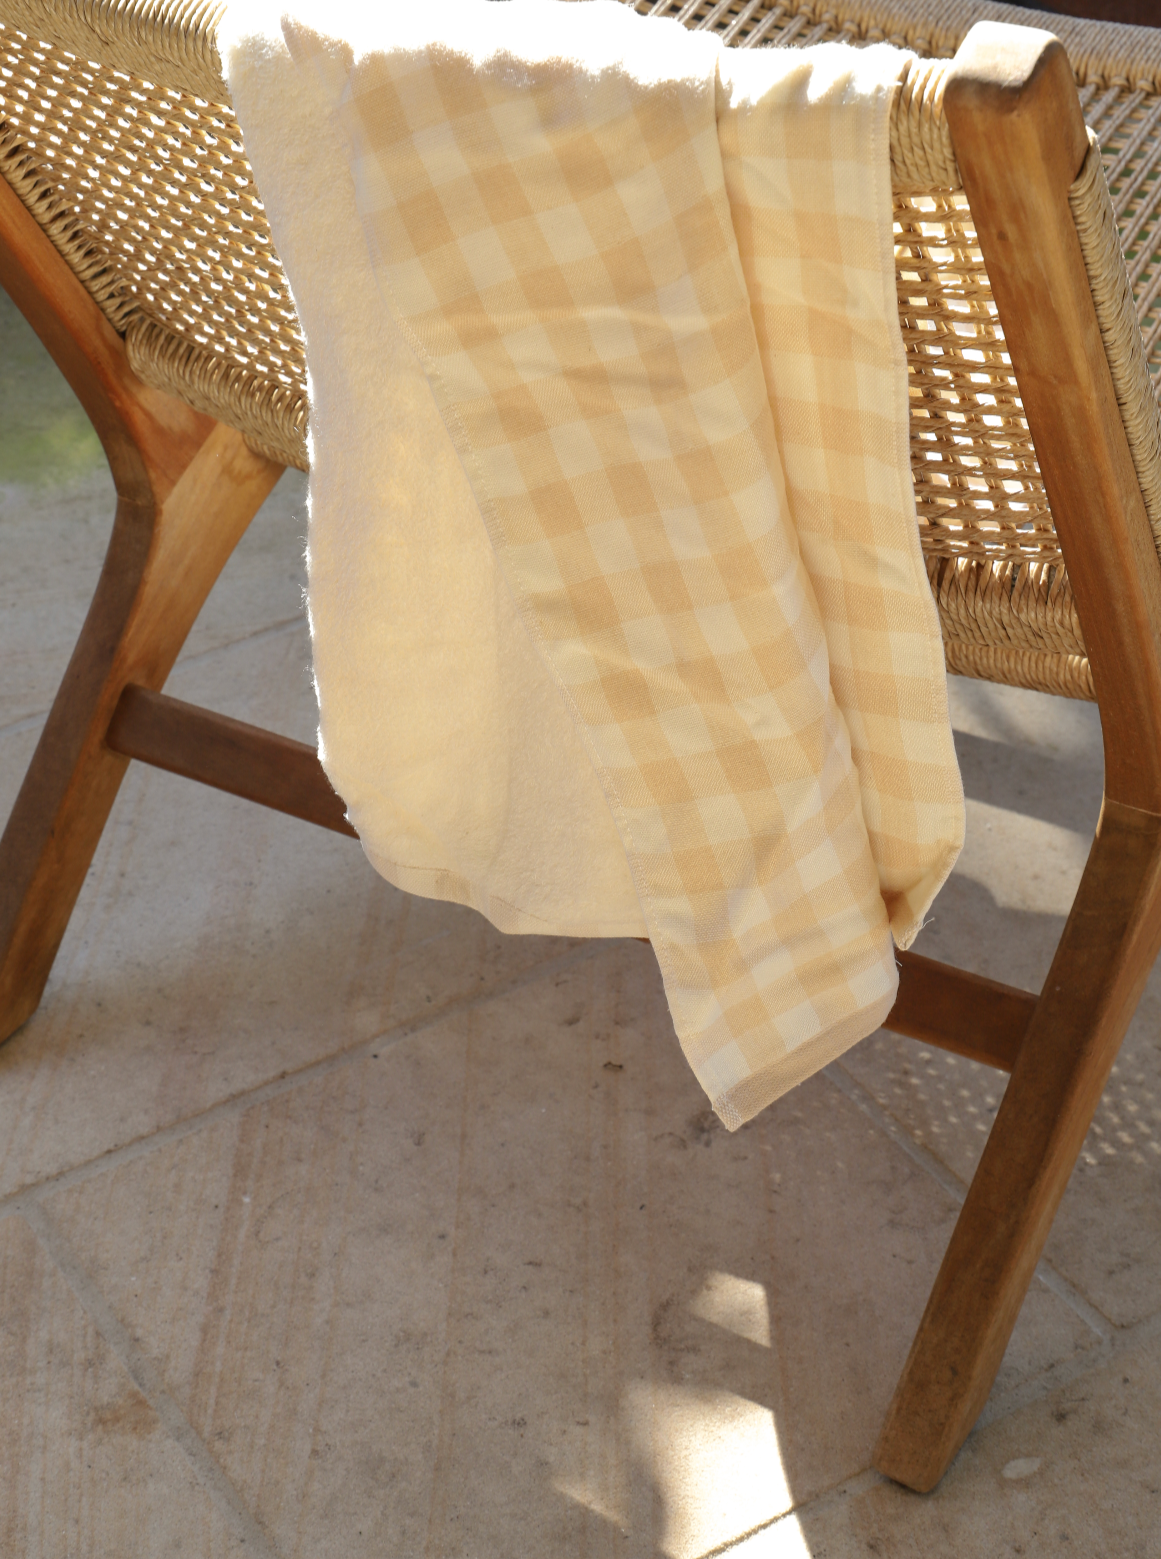 Super soft towel hanging on chair